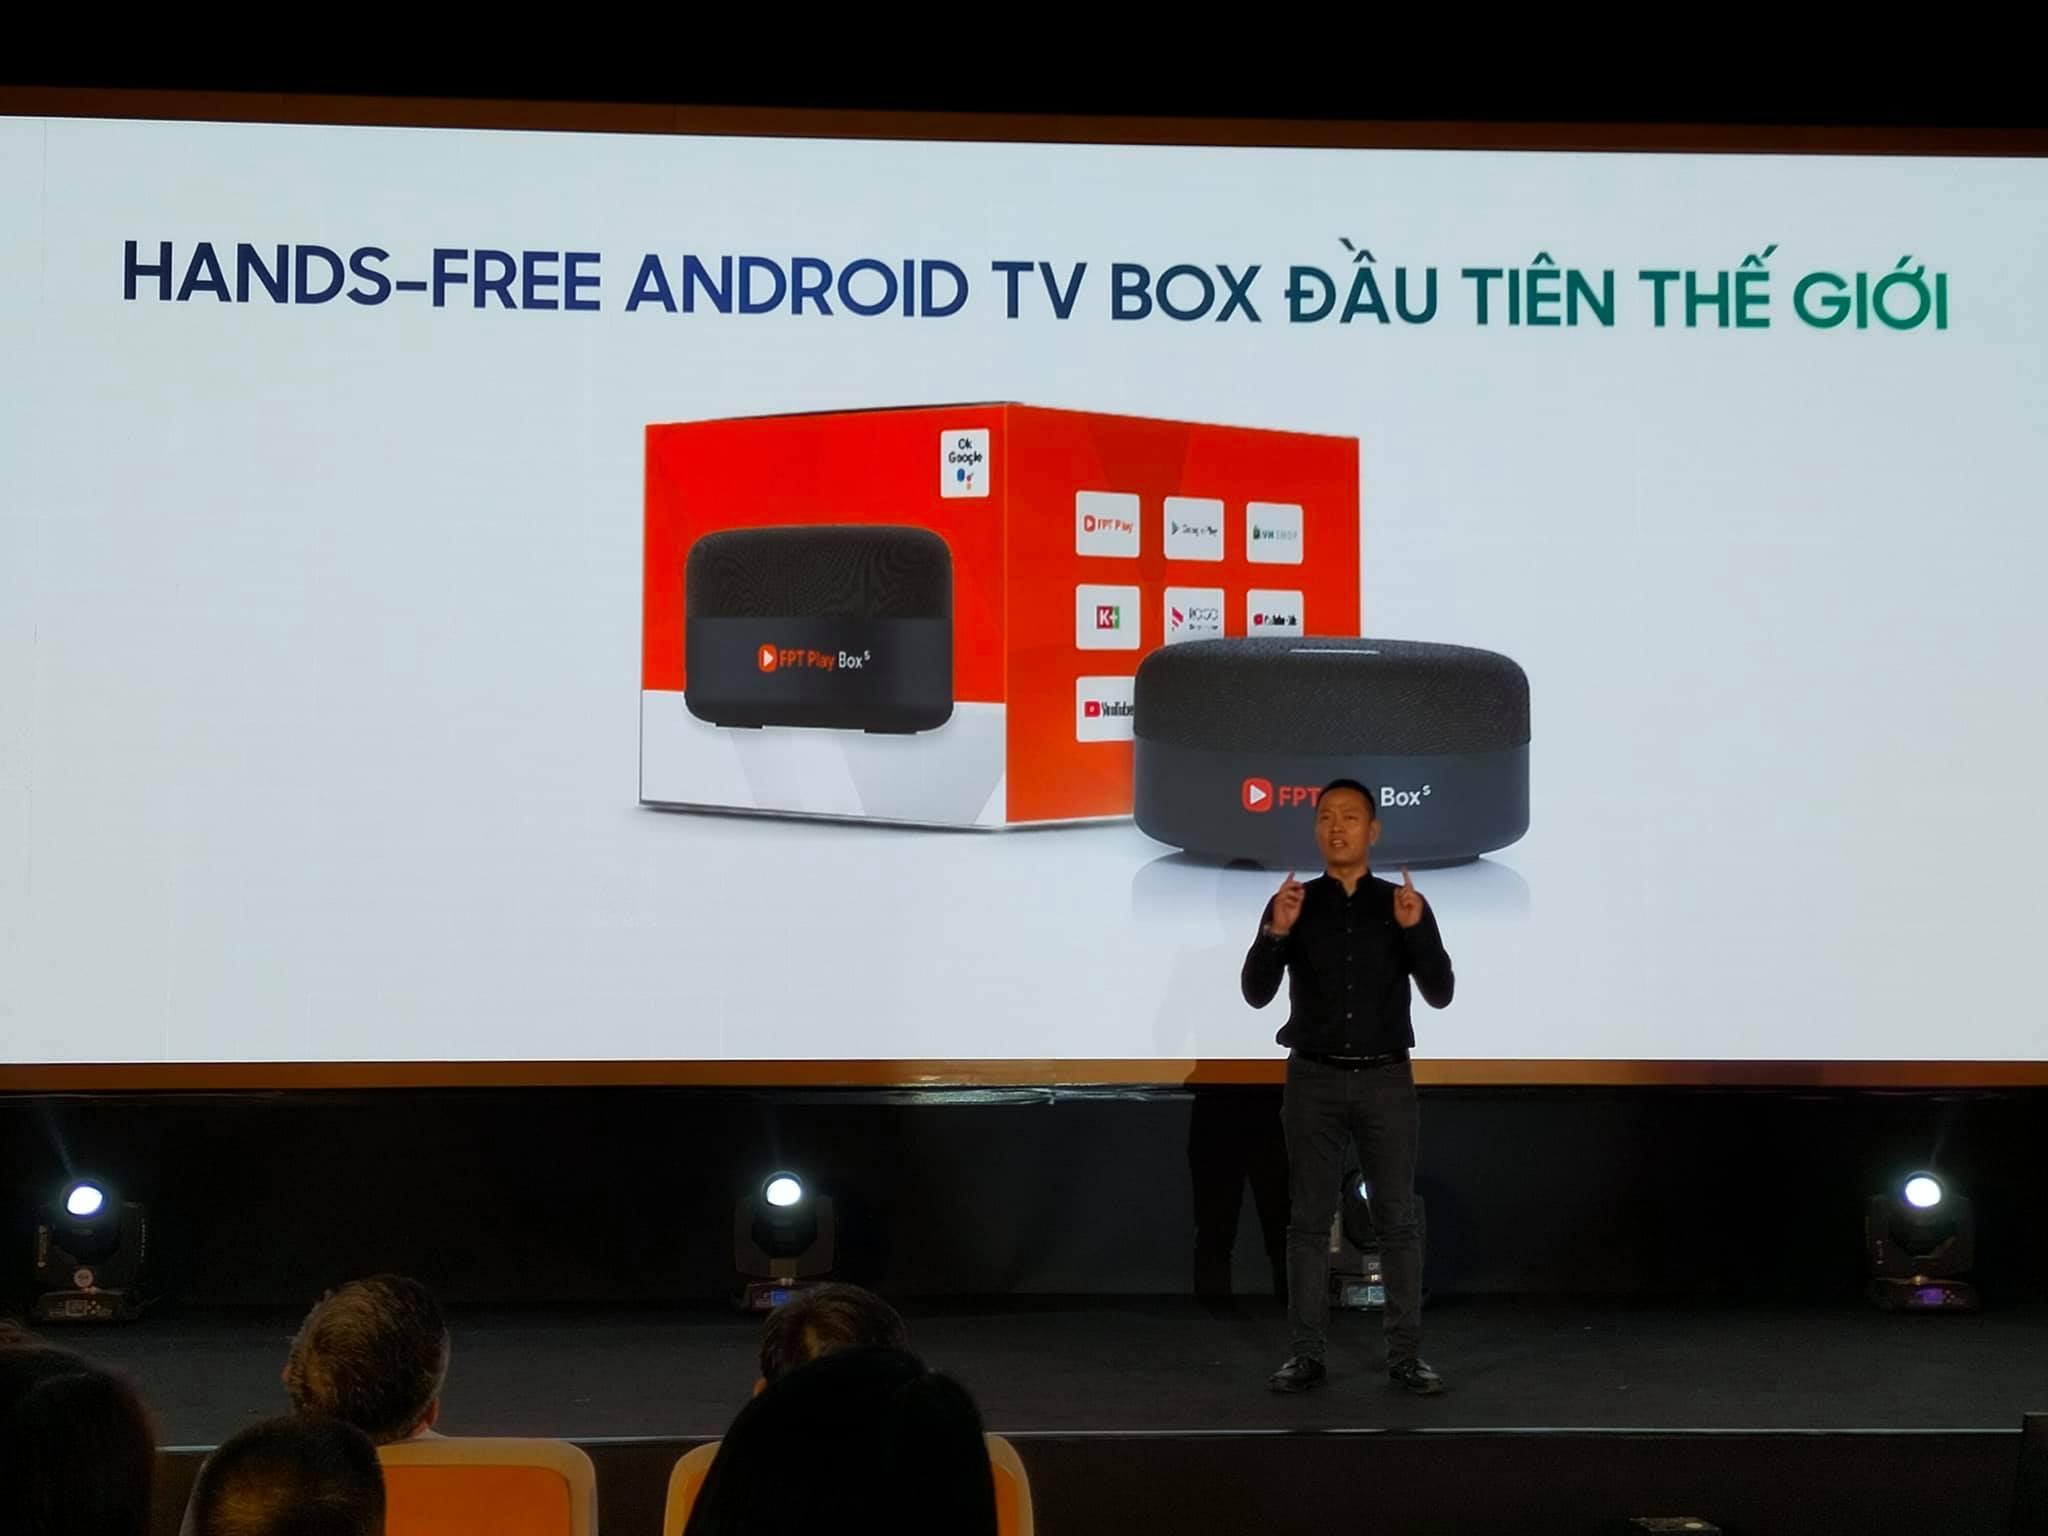 Hand-free-Android-TV-dau-tien-the-gii.jpg